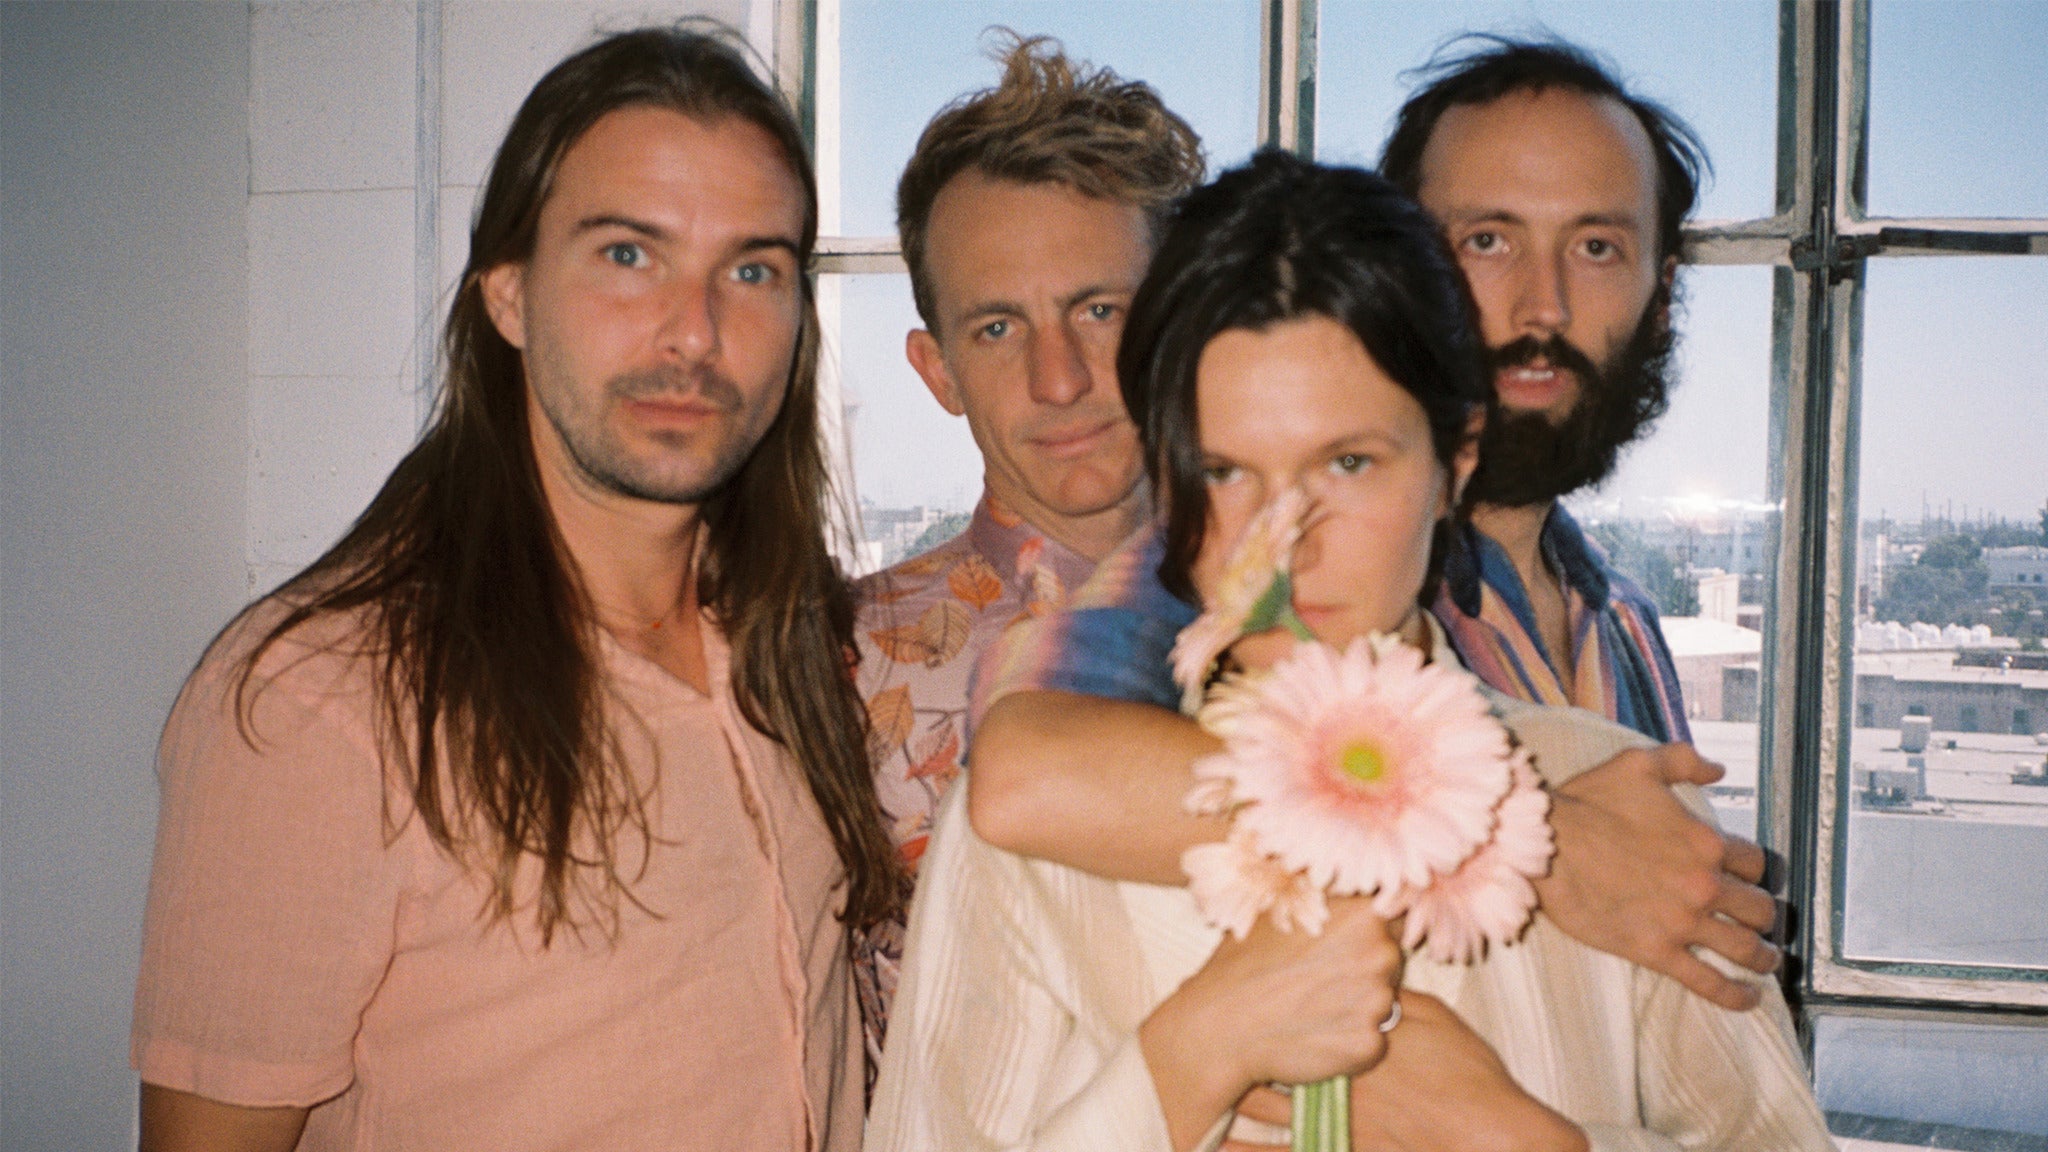 Big Thief w/ Special Guest in Seattle promo photo for Spotify presale offer code